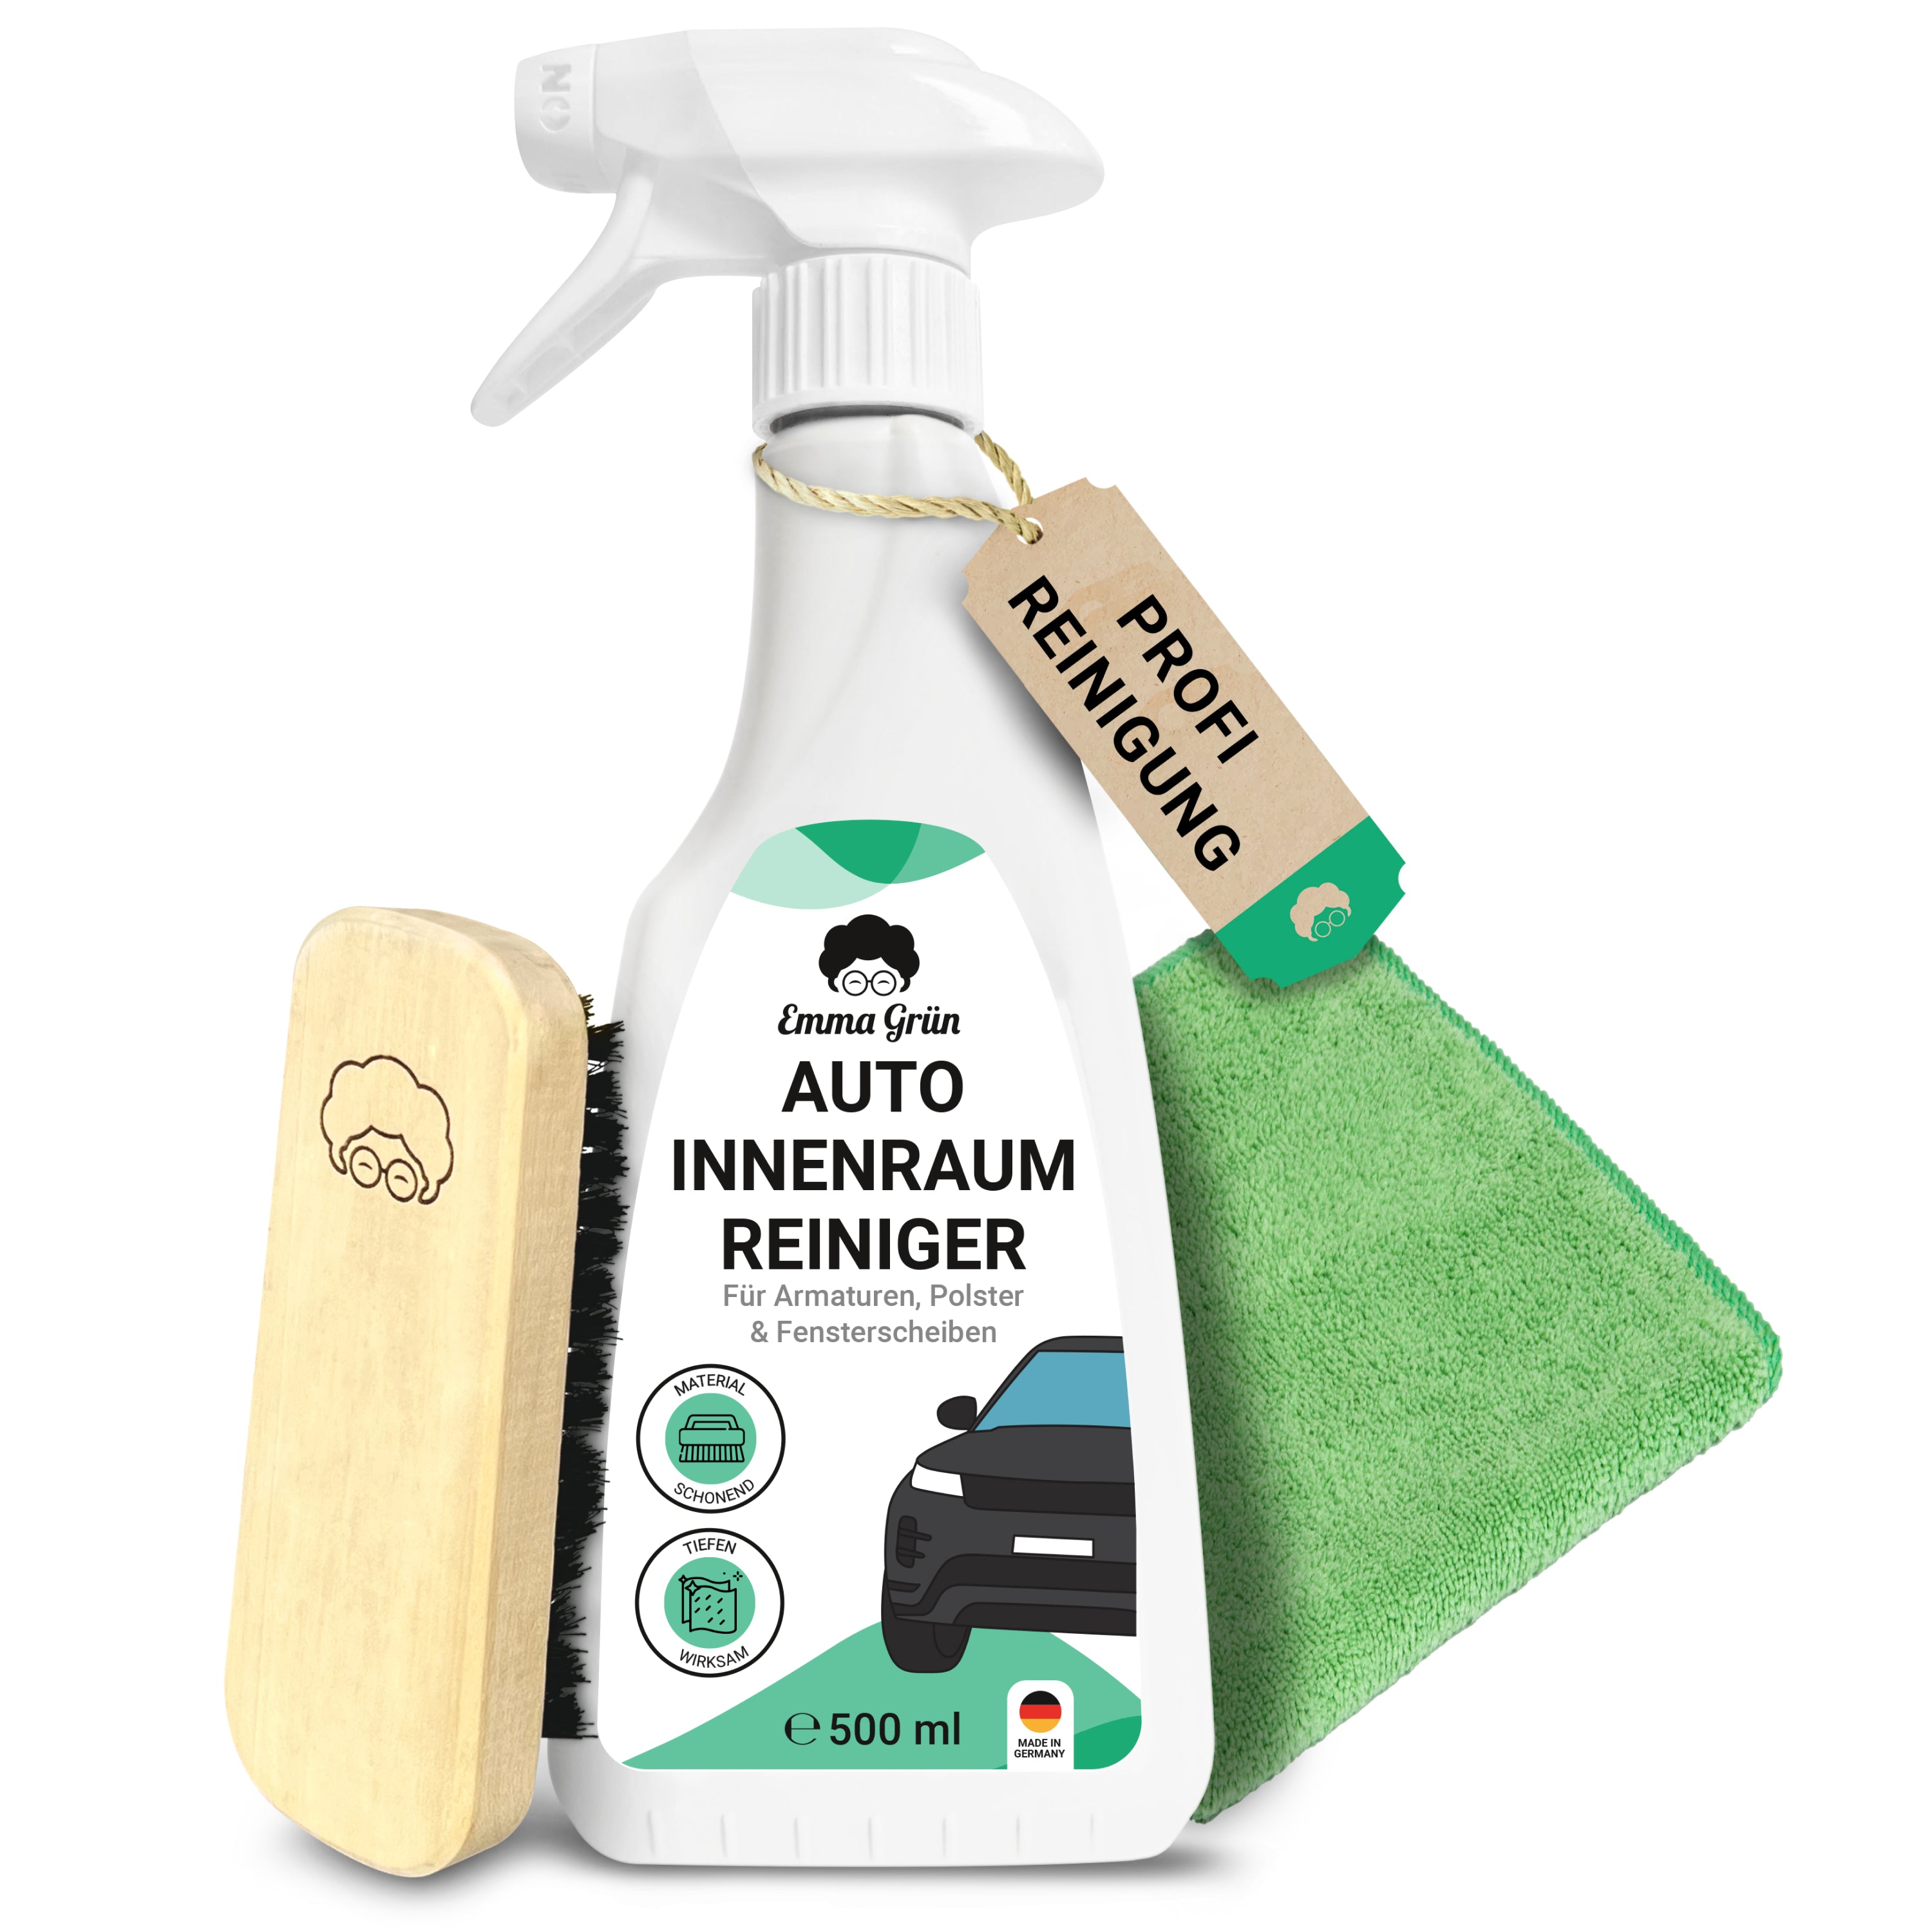 Car interior cleaner 500 ml with microfiber cloth and brush